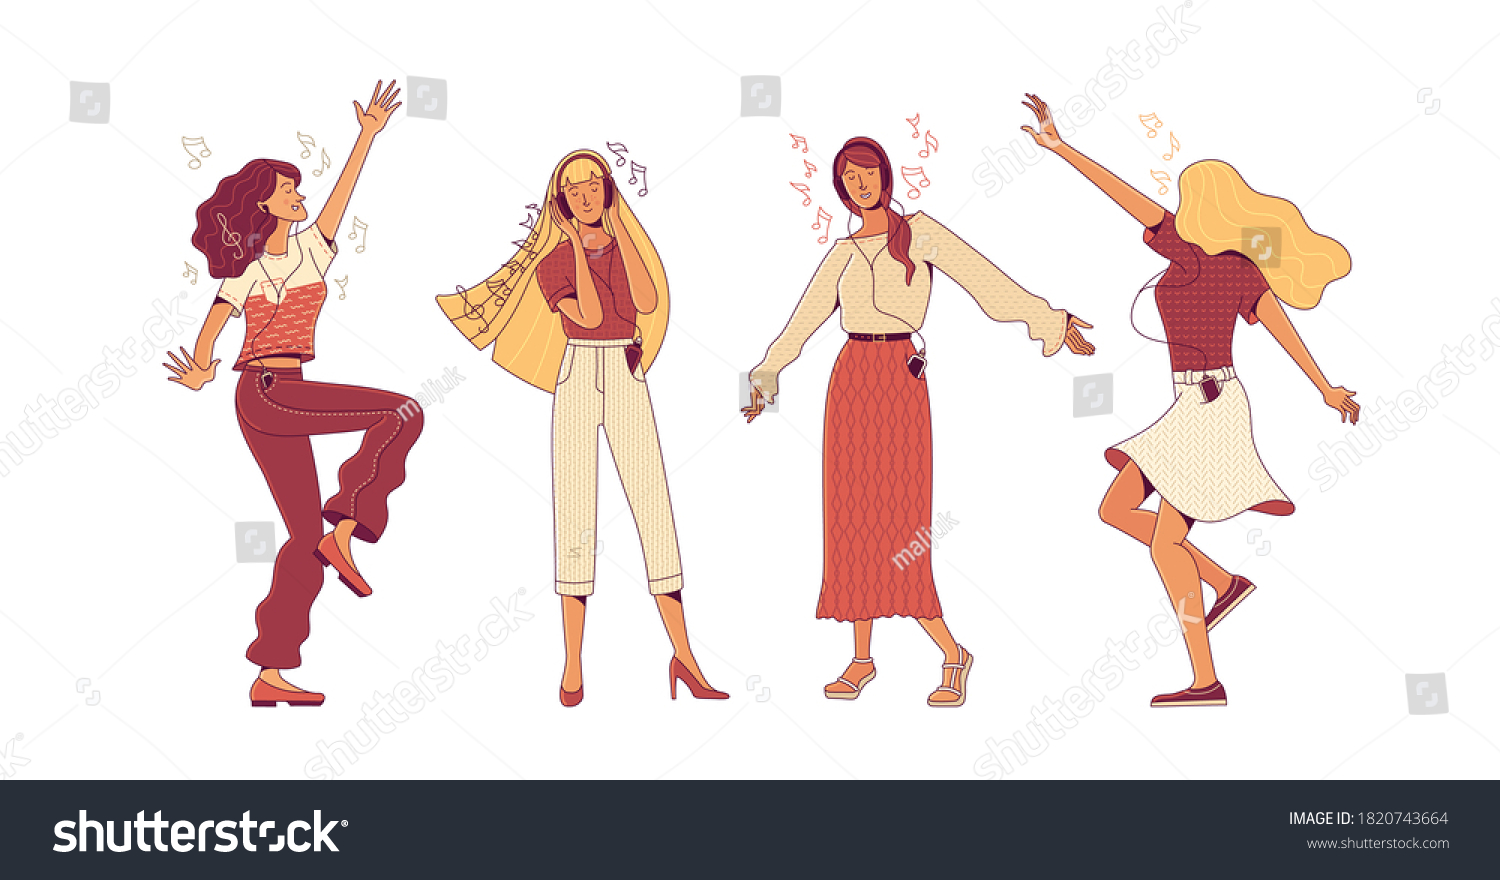 SVG of Collection of joyful young blonde and brunette women characters dancing at party and music notes on white background as hedonism and freedom concept svg